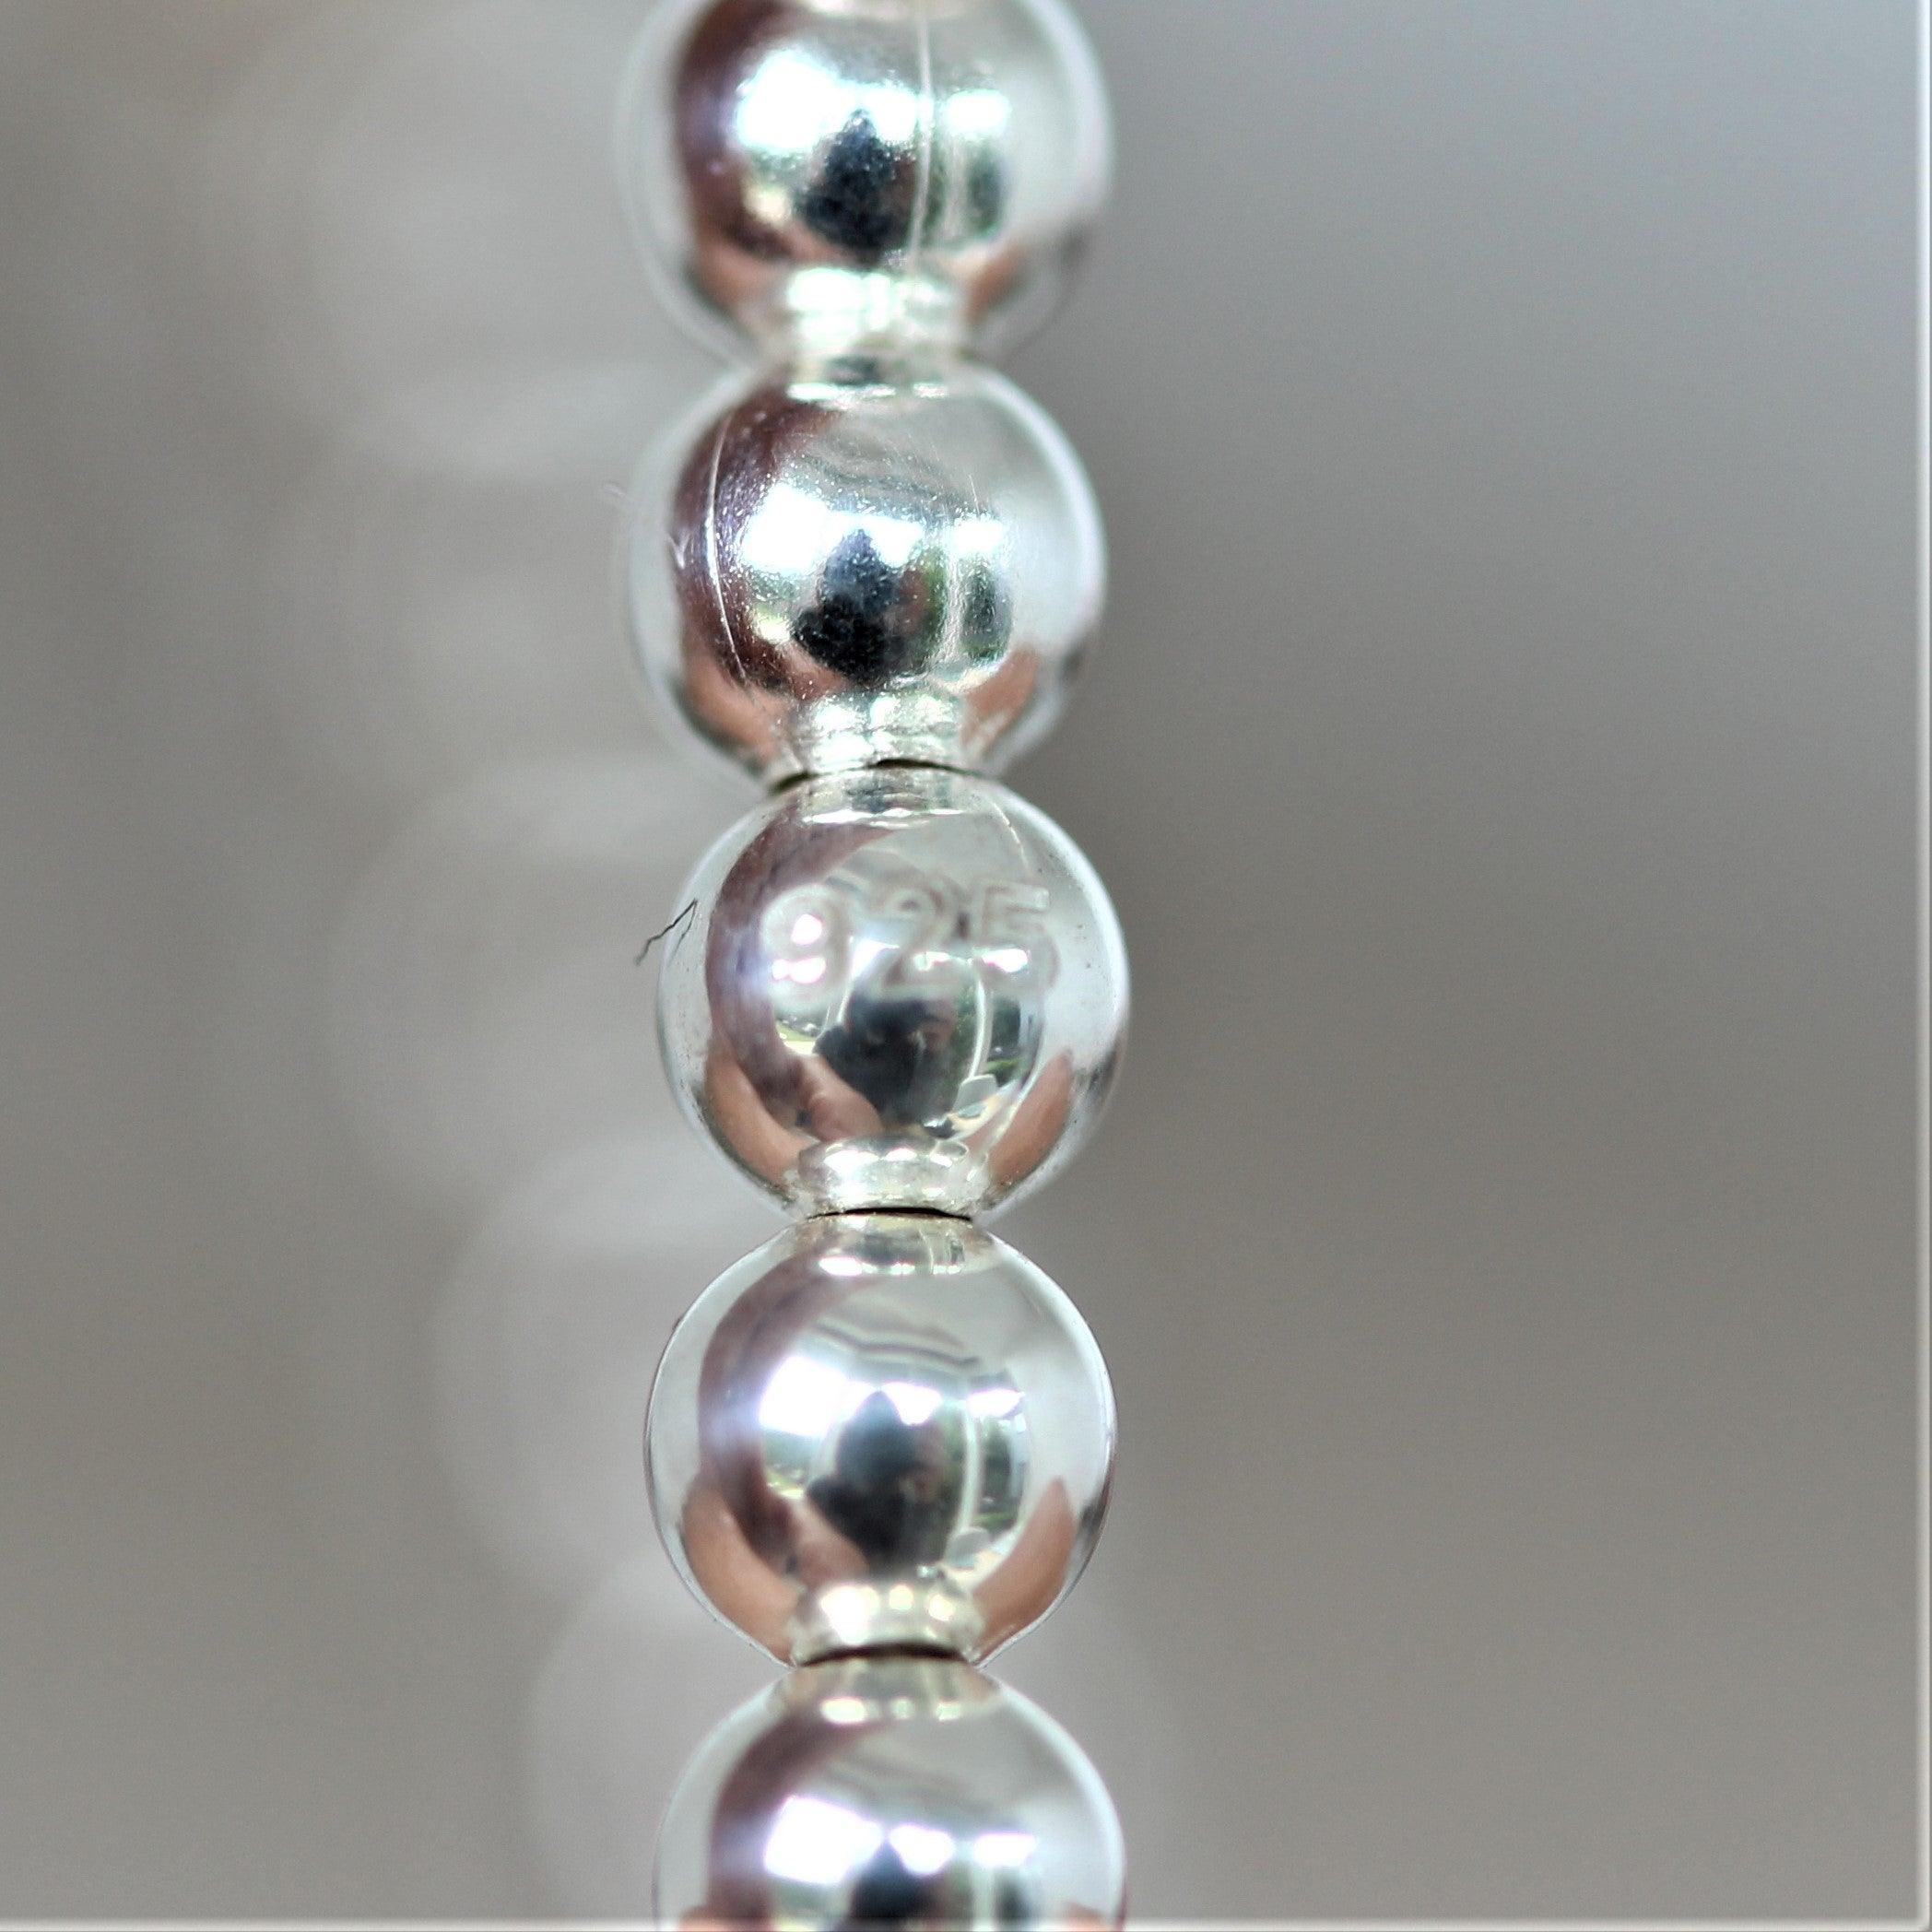 Sterling Silver 4 x 5mm Small Bead Balls & Pearl 17.5cm Stretch Bracelet - STERLING SILVER DESIGNS